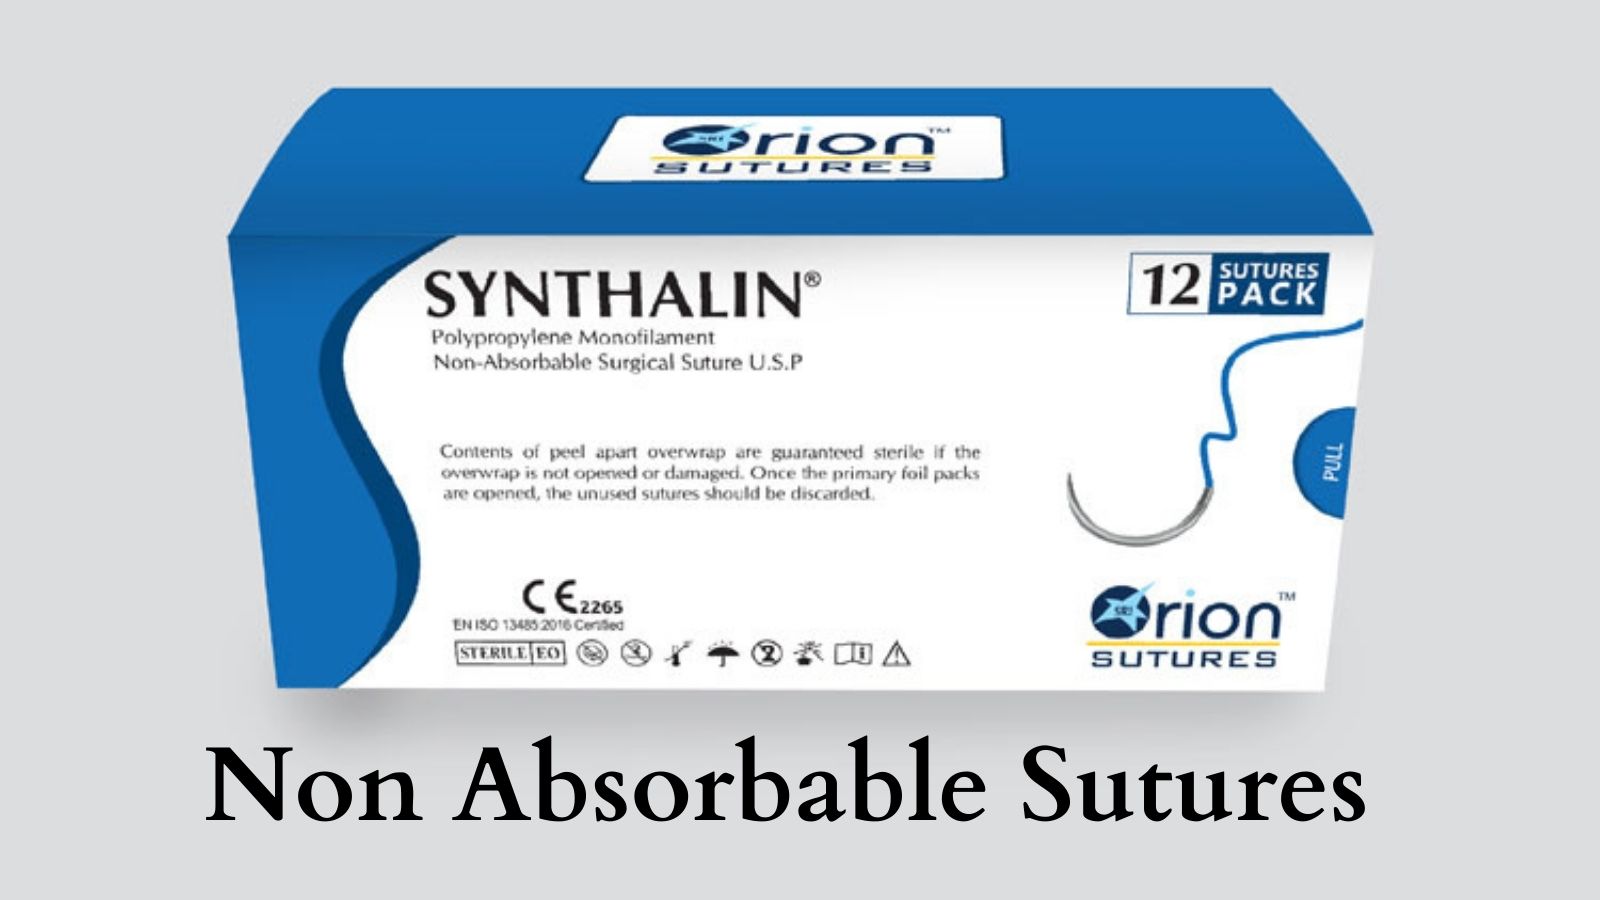 Finding The Ideal Prolene Suture Absorbable Supplier In India